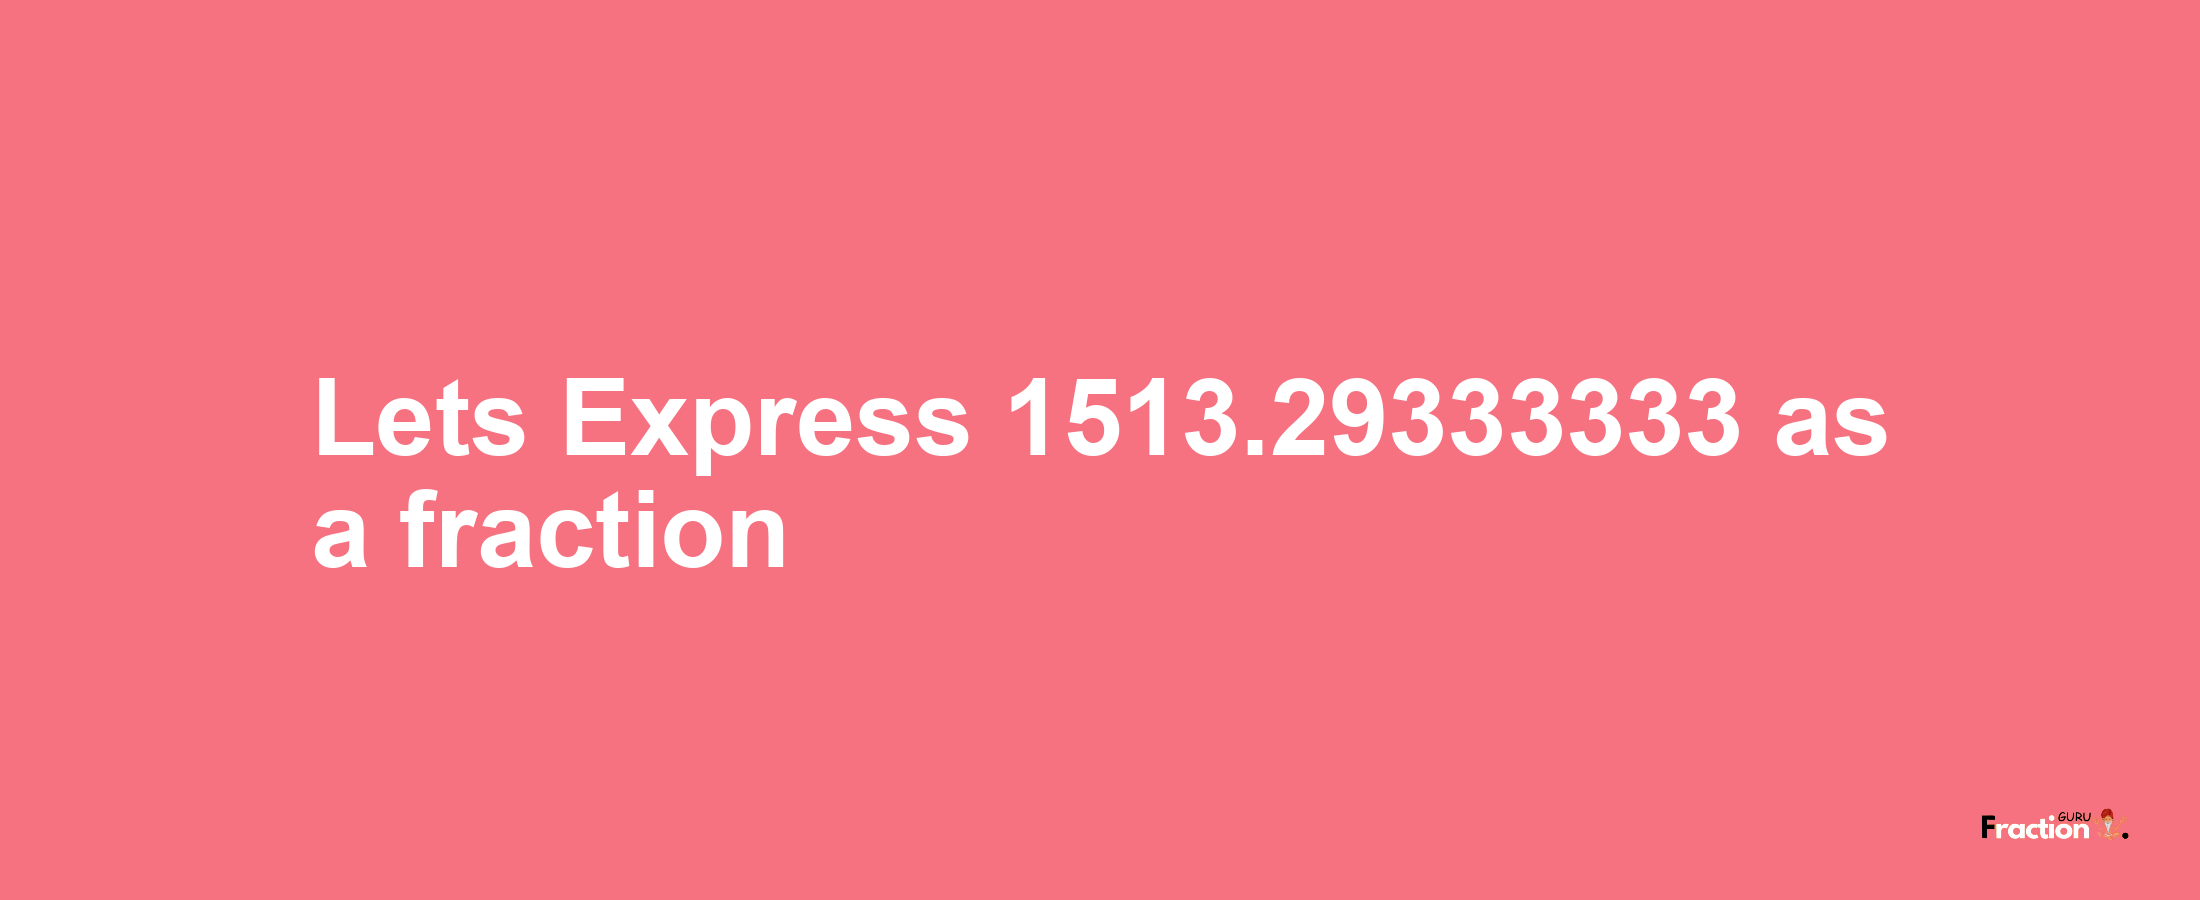 Lets Express 1513.29333333 as afraction